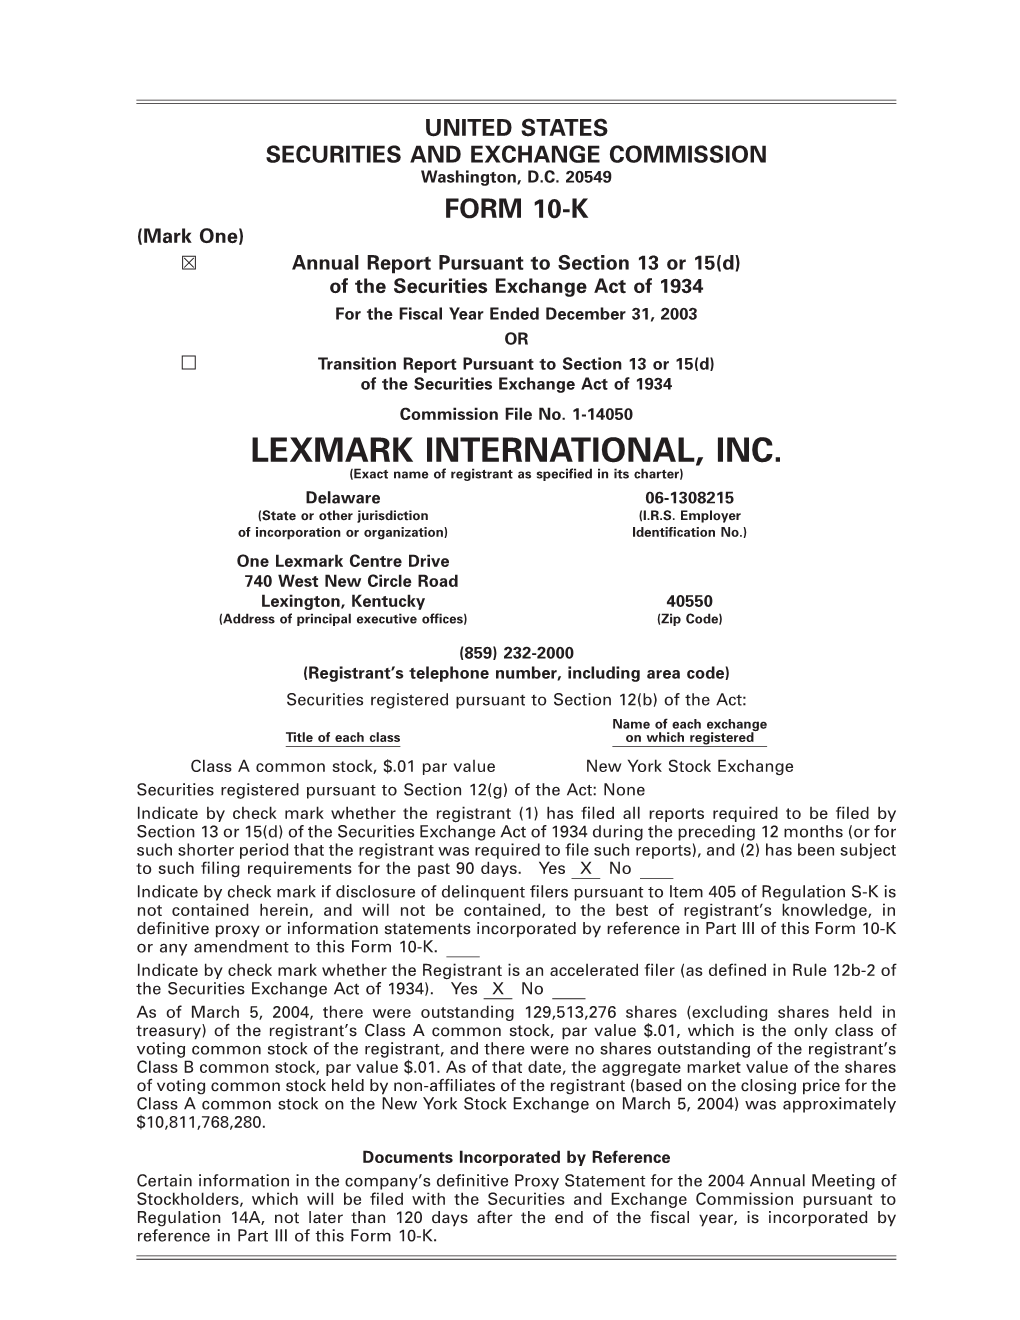 LEXMARK INTERNATIONAL, INC. (Exact Name of Registrant As Speciﬁed in Its Charter) Delaware 06-1308215 (State Or Other Jurisdiction (I.R.S